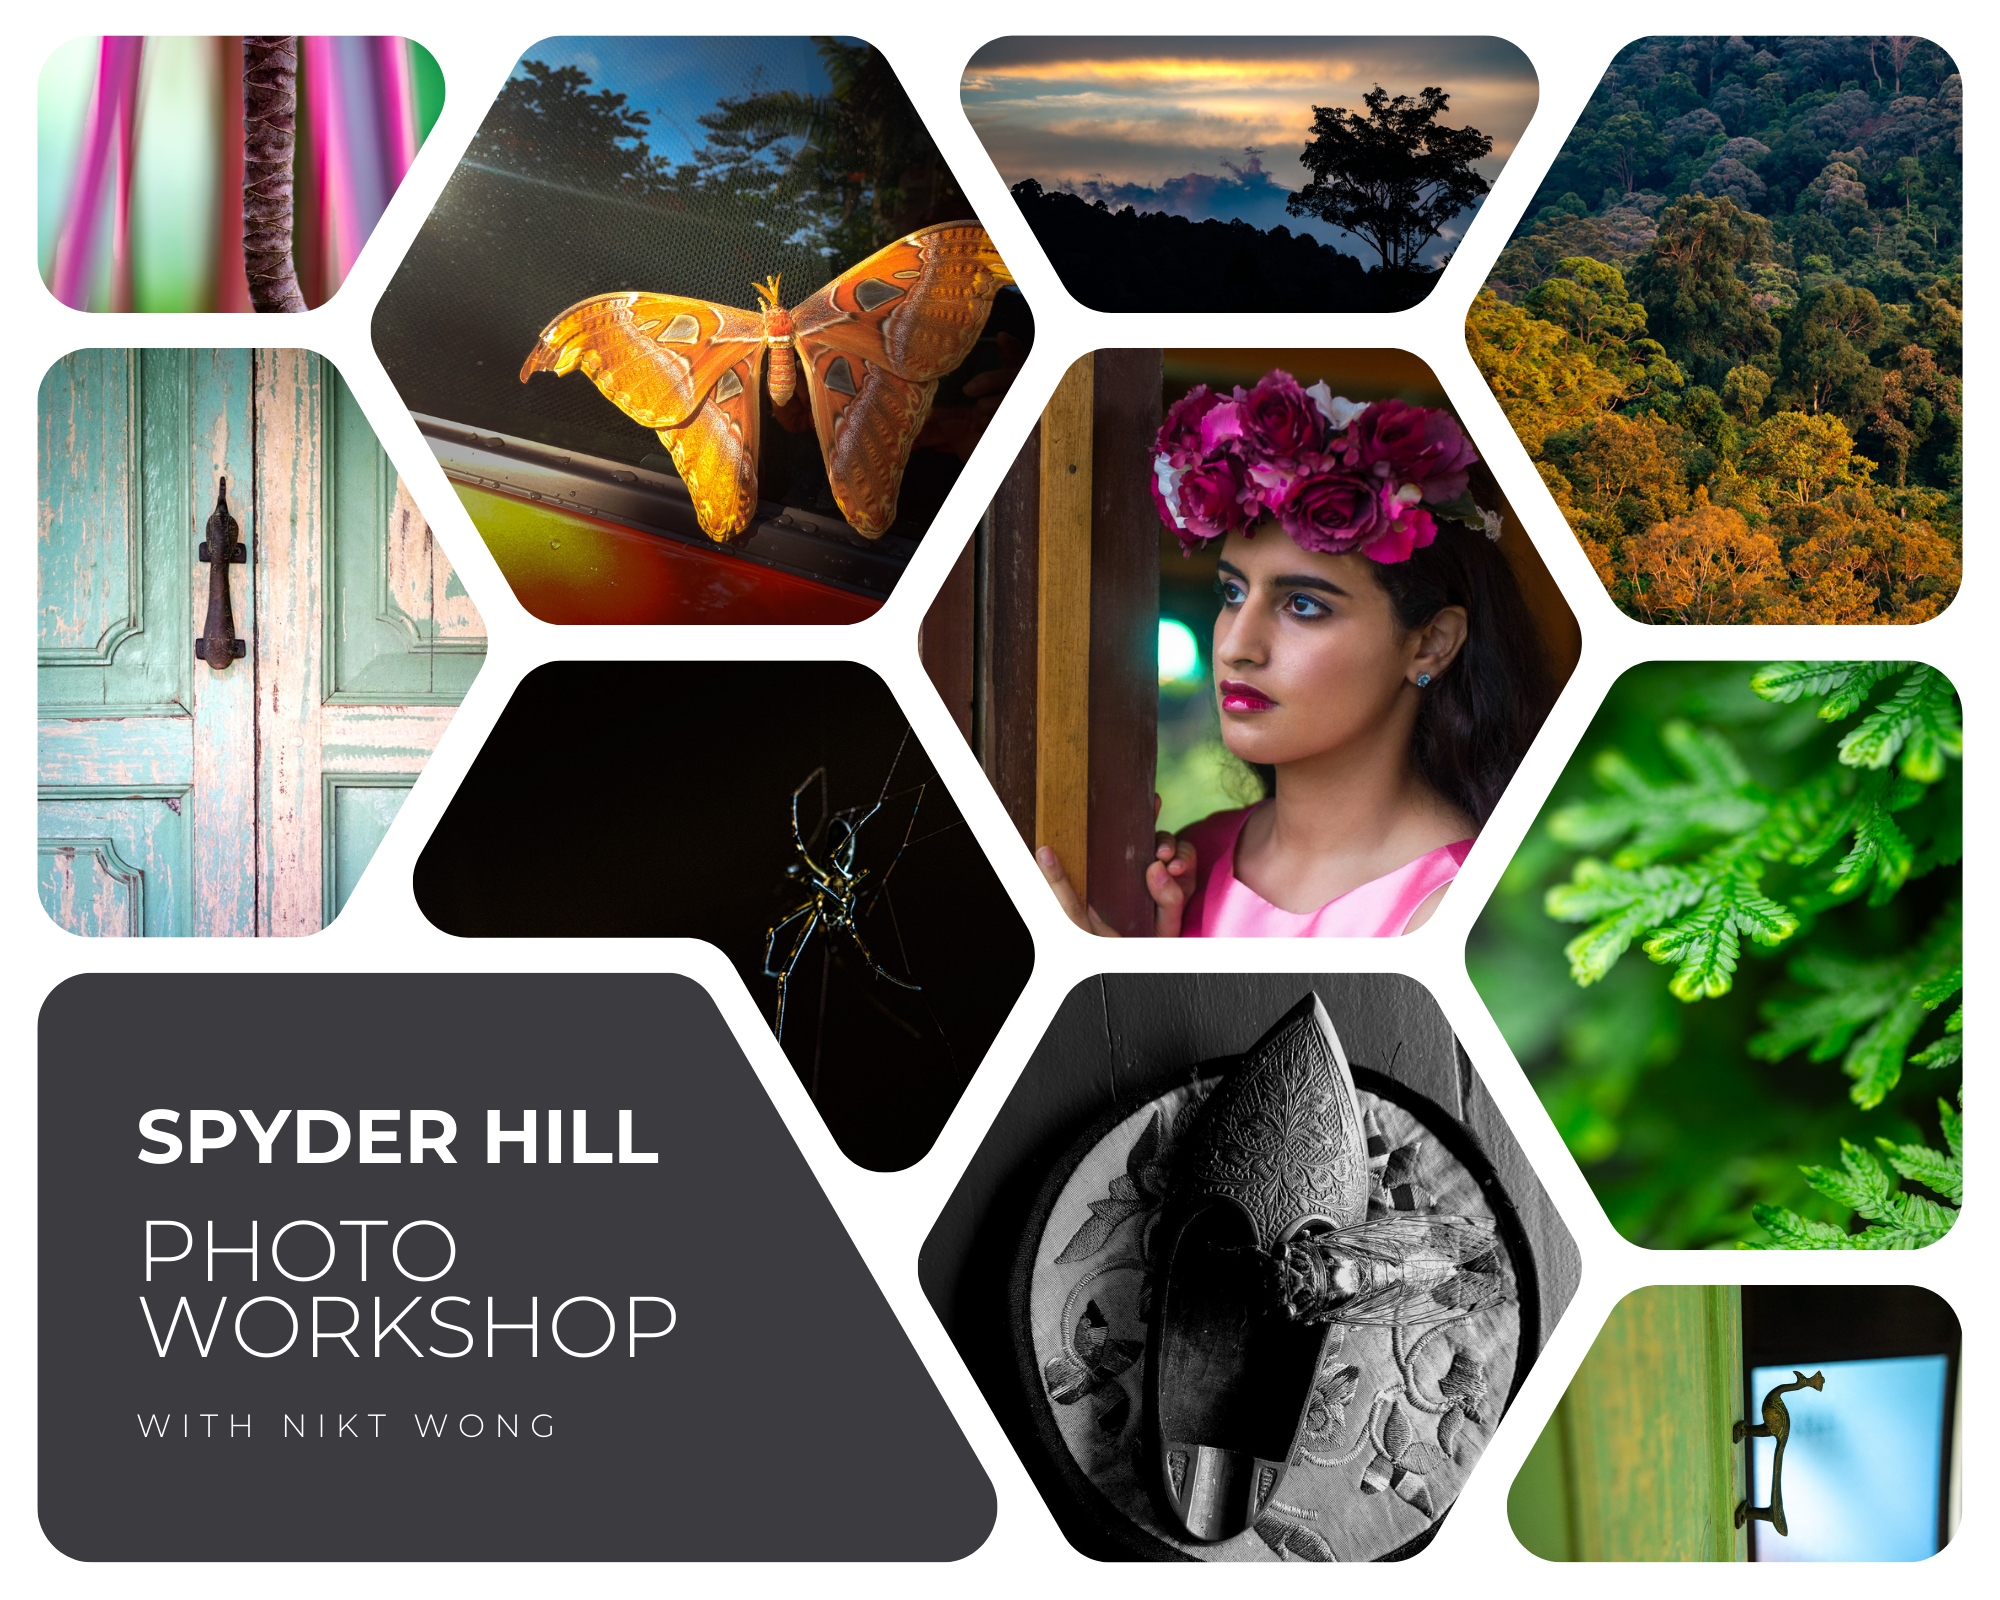 A collage of photos representing a photography workshop offered at Spyder Hill.